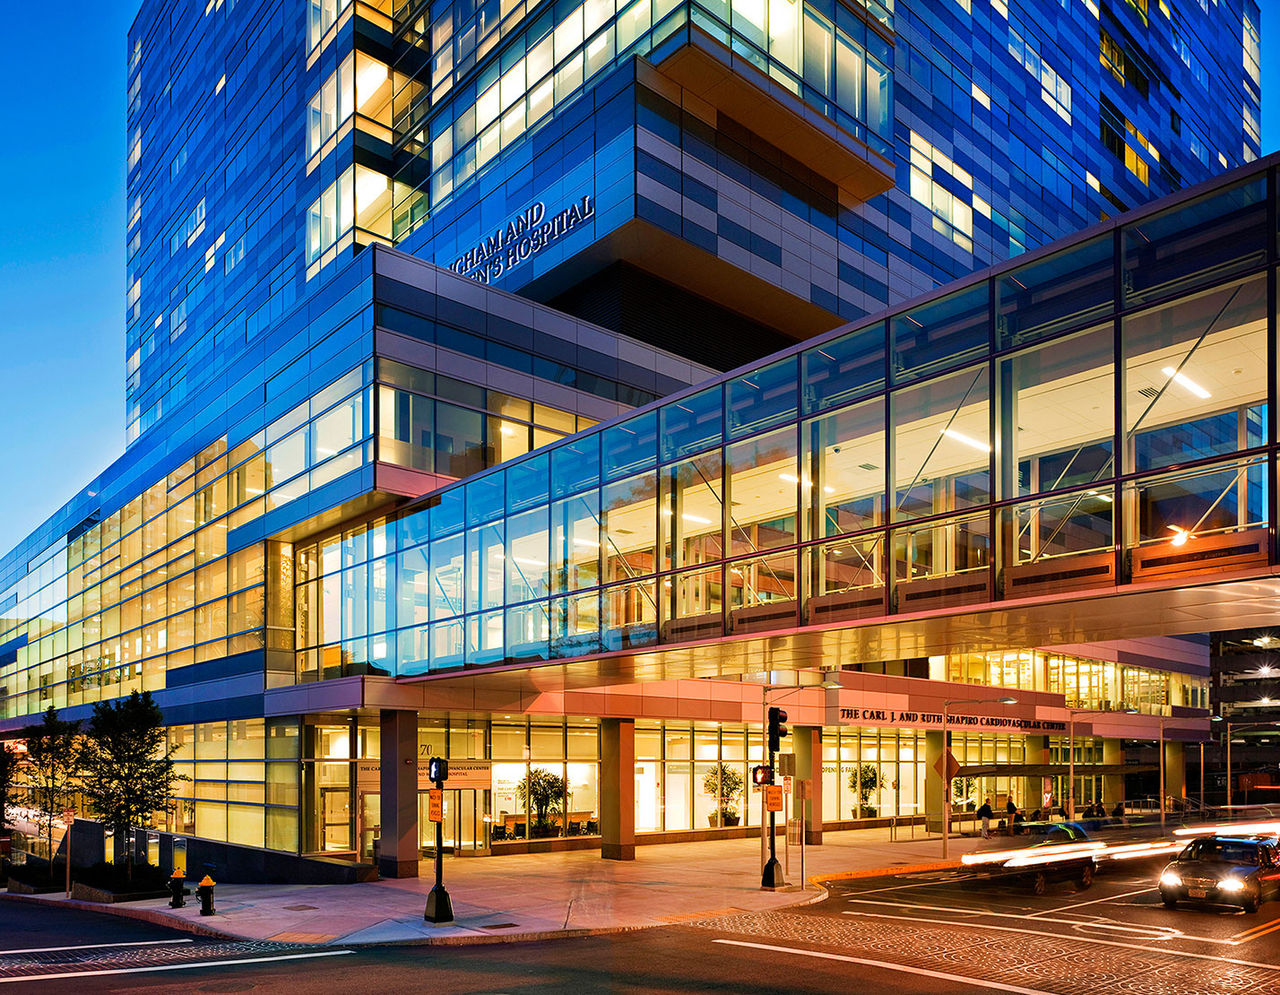 Brigham and Women's Hospital building exterior at night